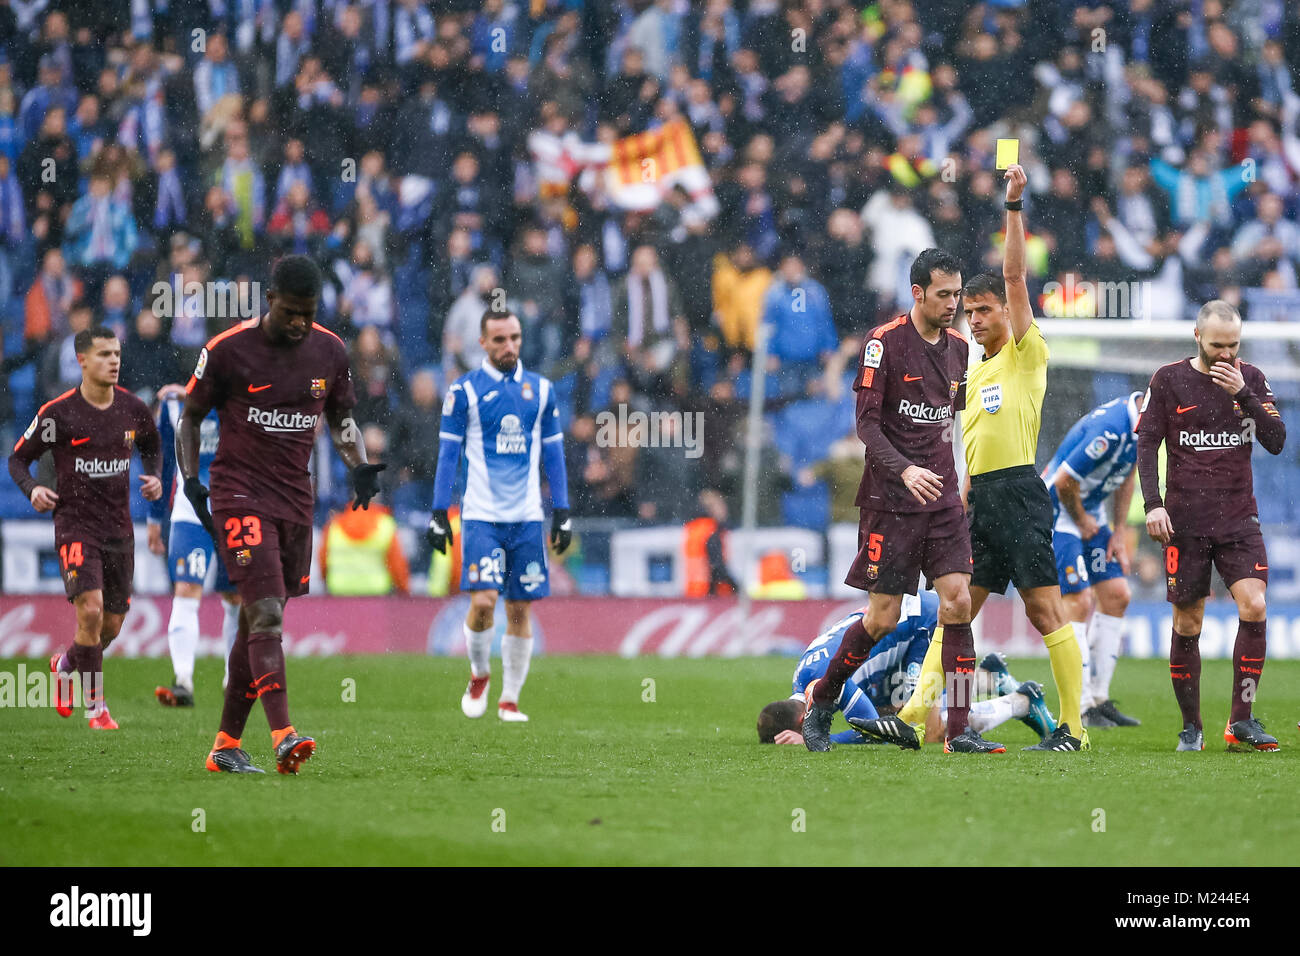 Barcelona, Spain. 04th Feb, 2018. The referee, Jesus Gil Manzano shows the yellow card to FC Barcelona defender Samuel Umtiti (23) during the match between RCD Espanyol and FC Barcelona, for the round 22 of the Liga Santander, played at RCDE Stadium on 4th February 2018 in Barcelona, Spain. Credit: Gtres Información más Comuniación on line, S.L./Alamy Live News Stock Photo